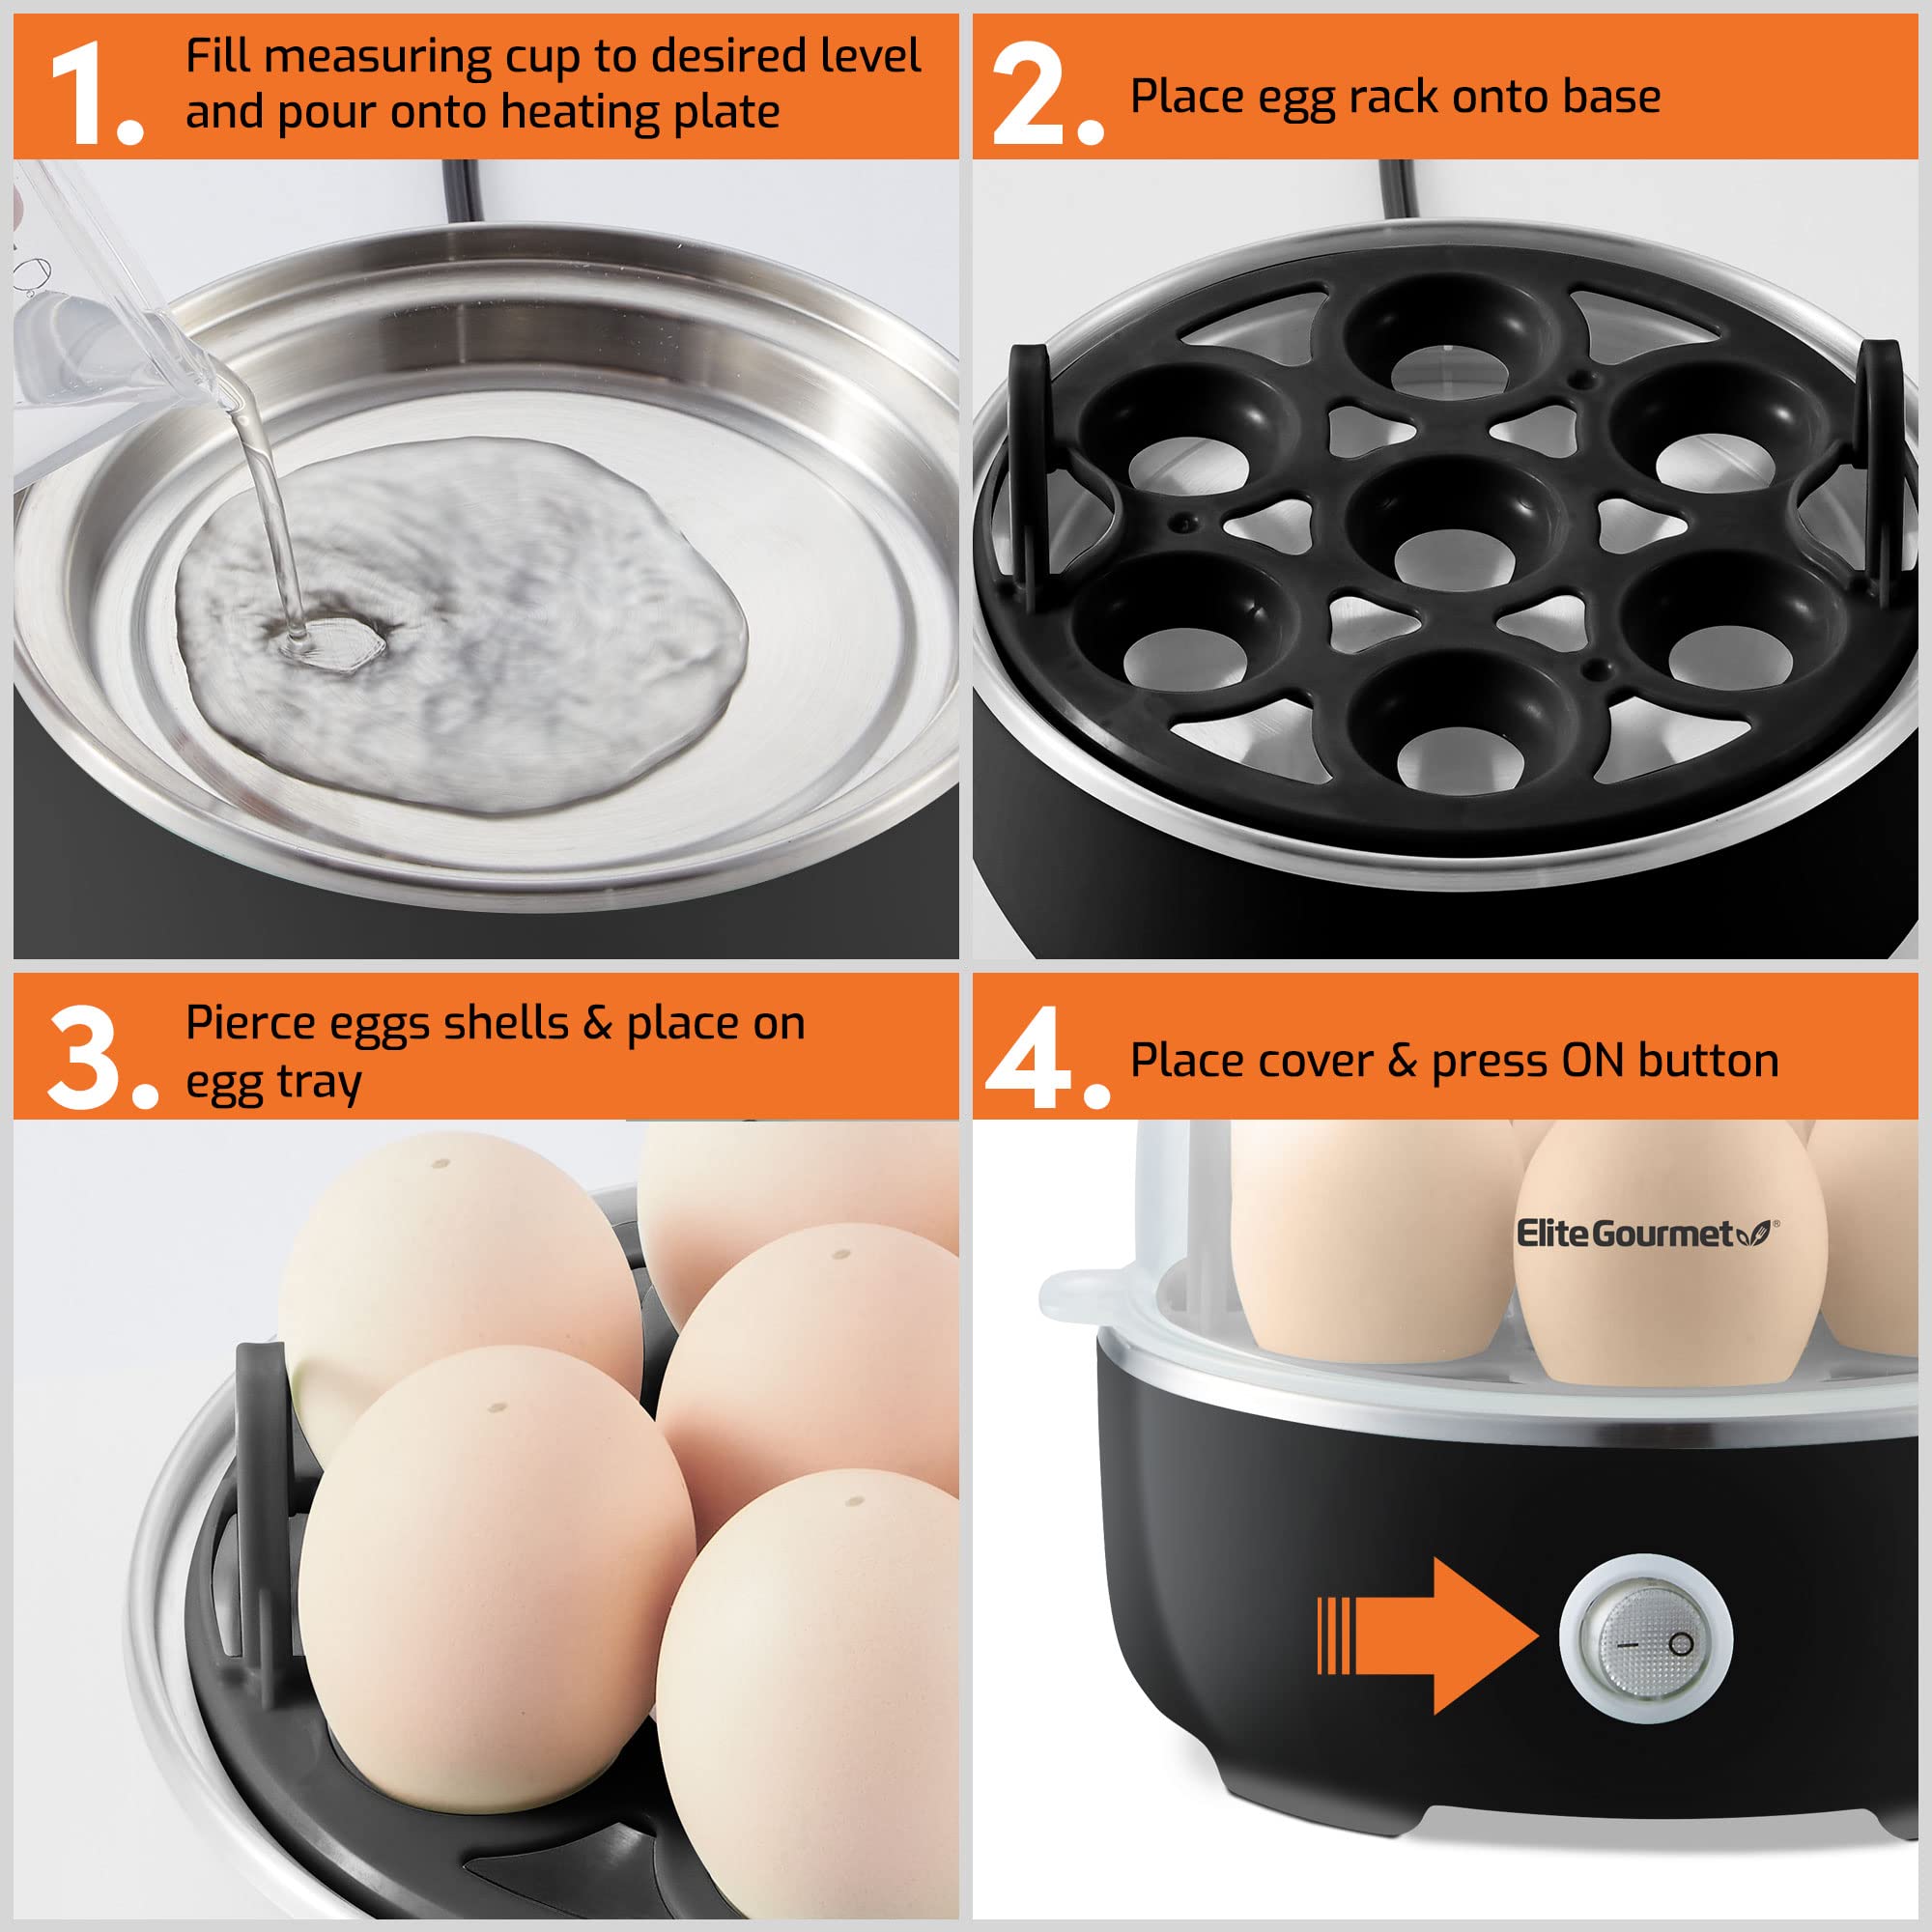 Elite Gourmet EGC115B Easy Egg Cooker Electric 7-Egg Capacity, Soft, Medium, Hard-Boiled Egg Cooker with Auto Shut-Off, Measuring Cup Included, BPA Free, Classic Black